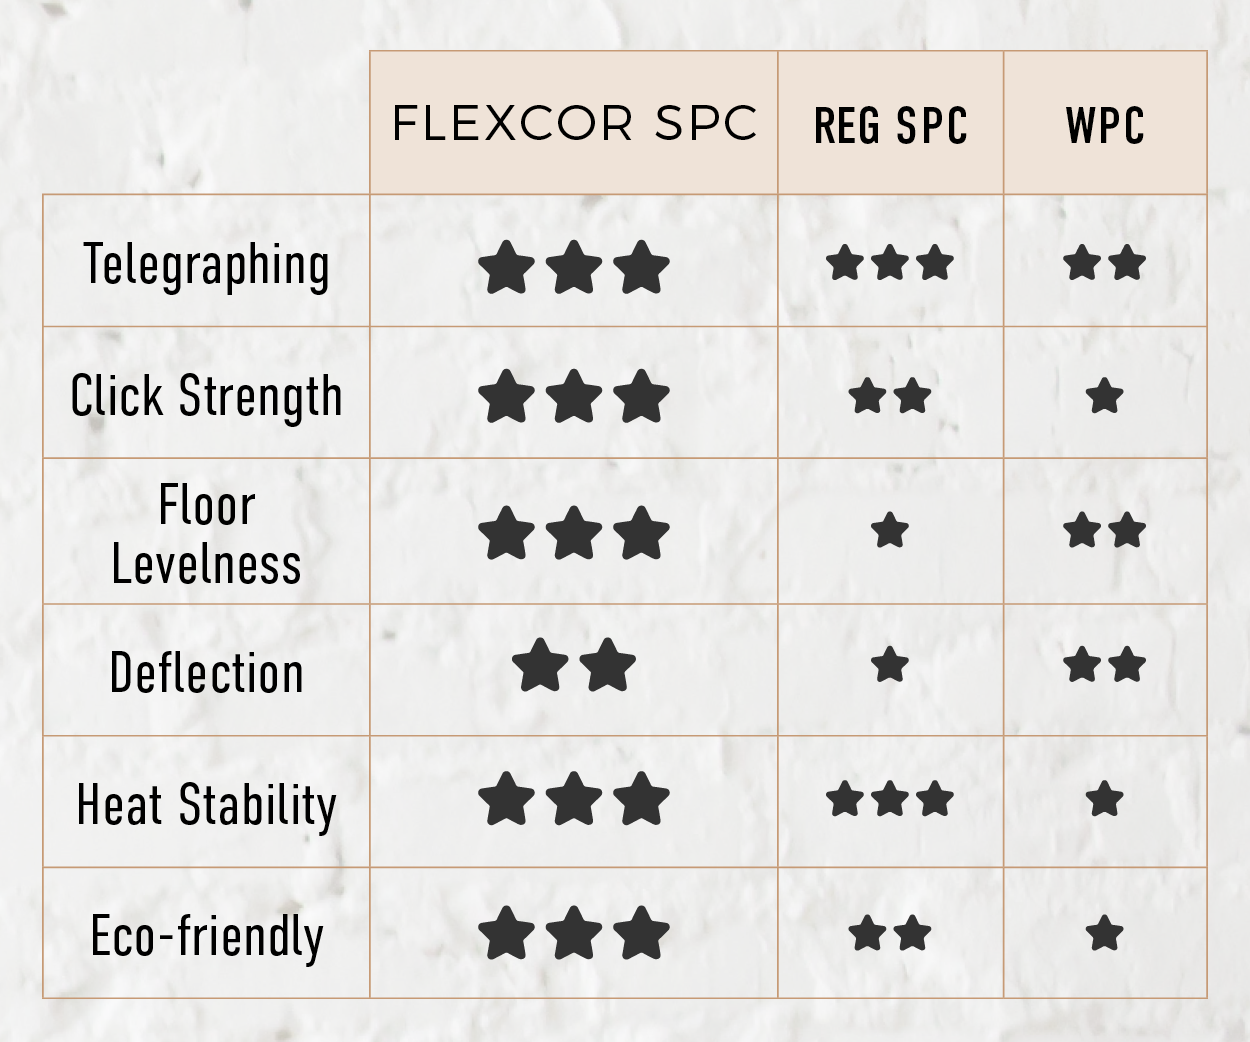 Chart comparing Flexcor SPC to regular SPC and WPC